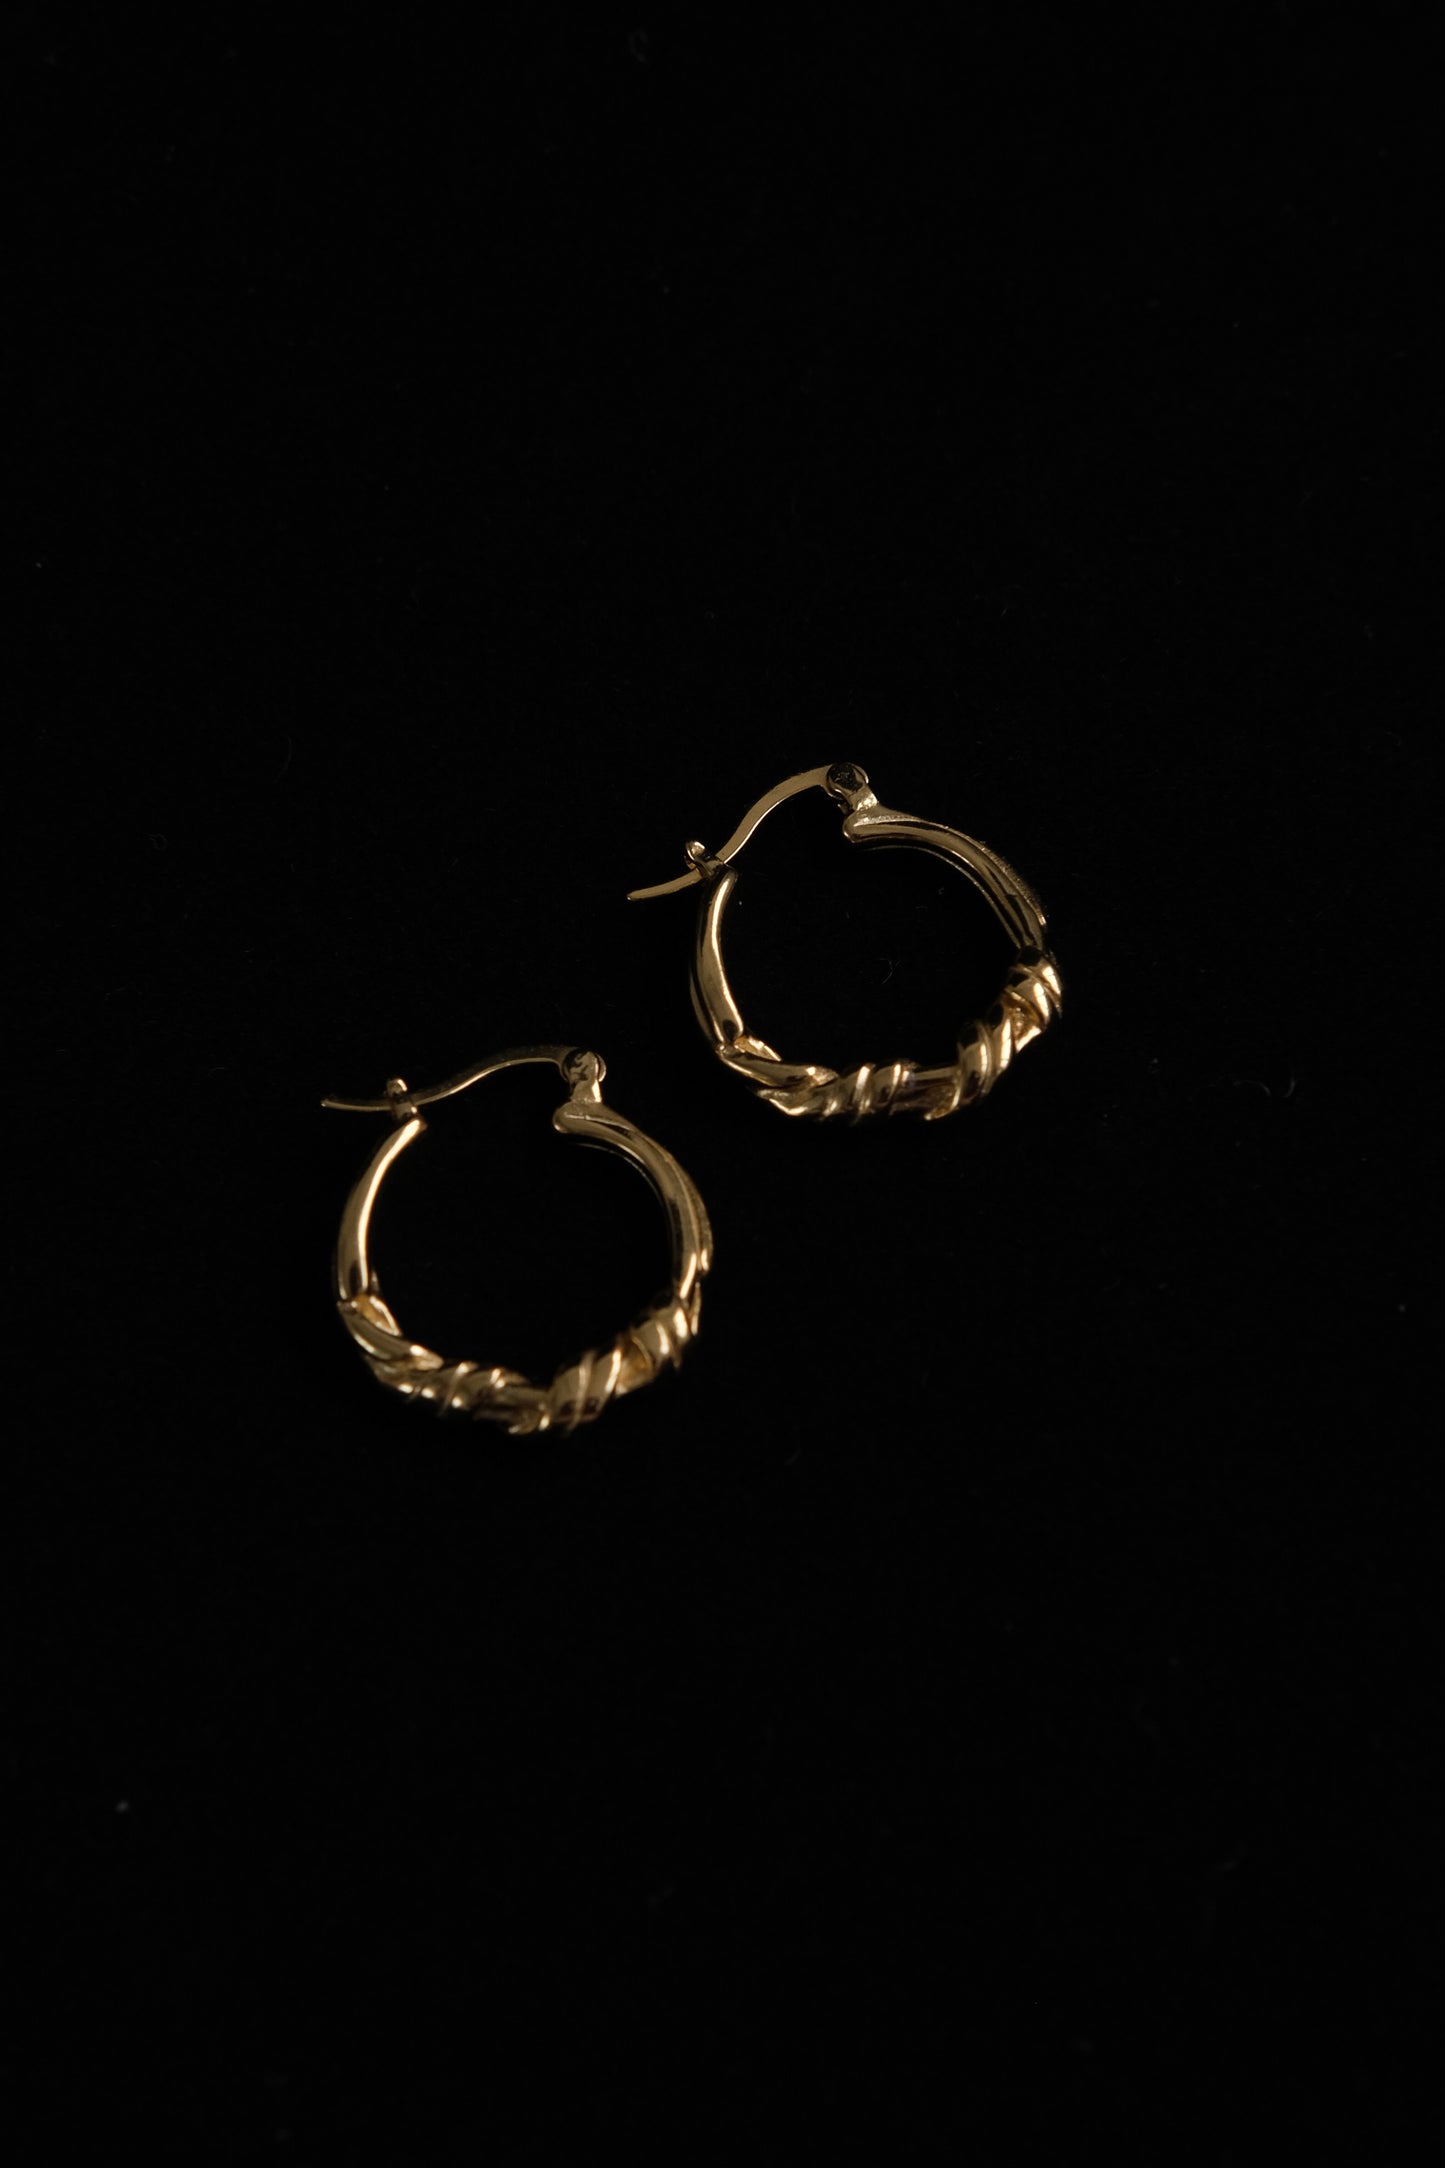 French style knotted earrings in Gold Vermeil